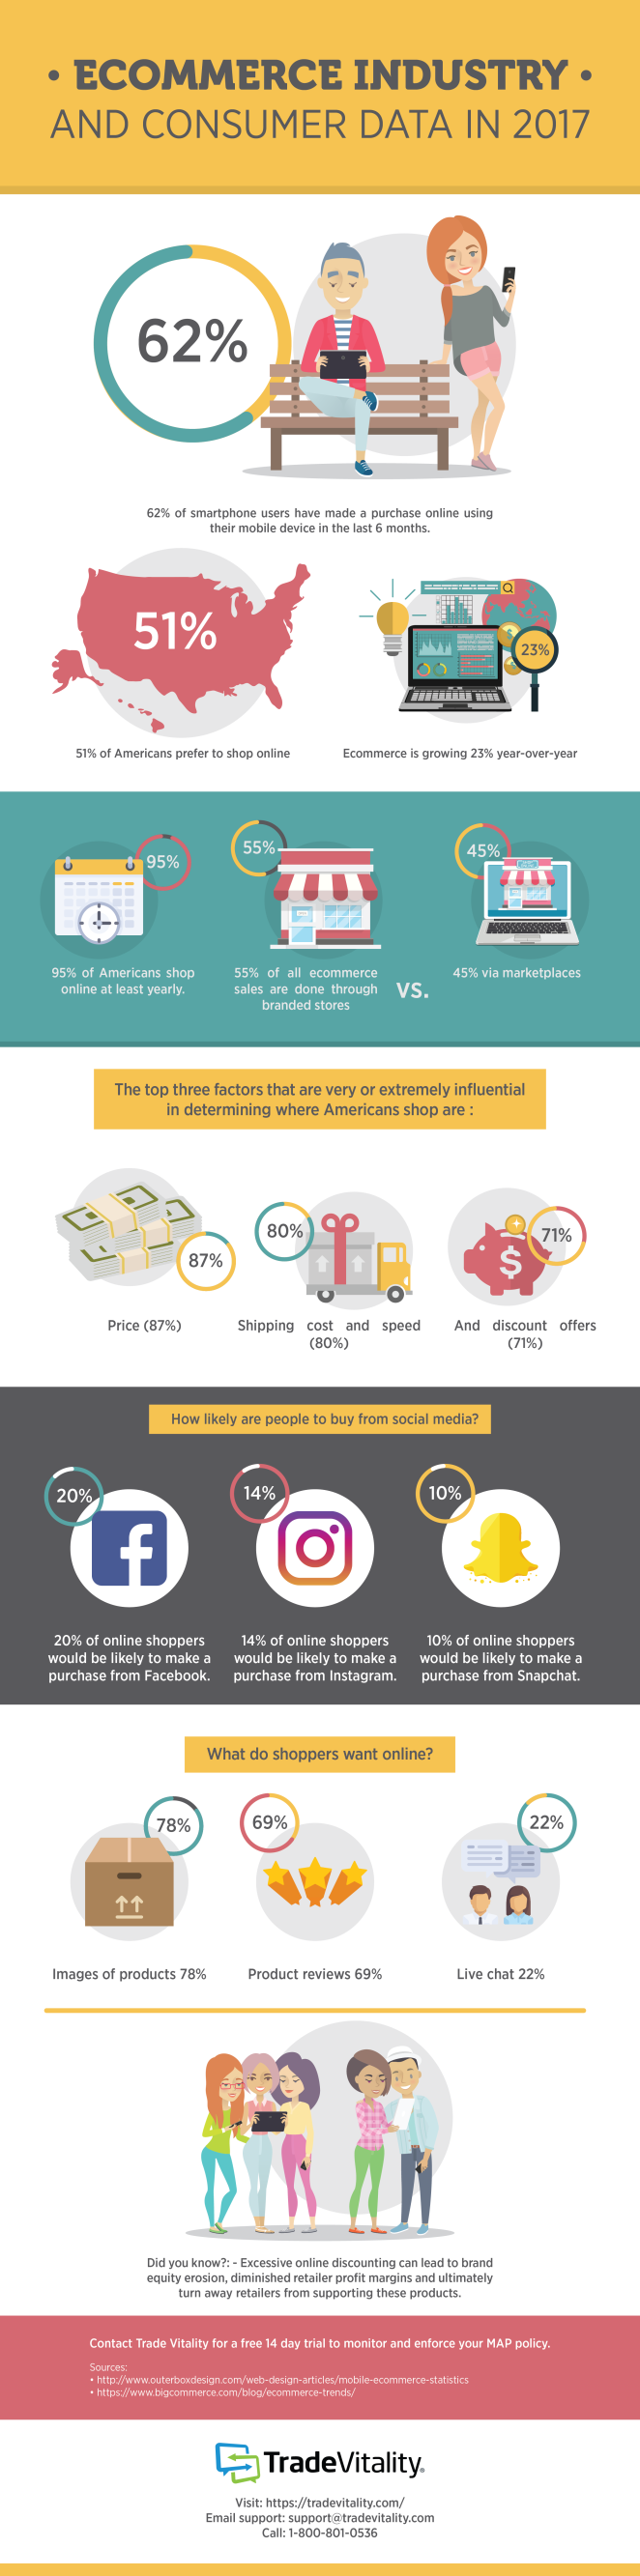 eCommerce Industry Trends and Consumer Data Infographic - eCommerce Consulting - Kate Vega